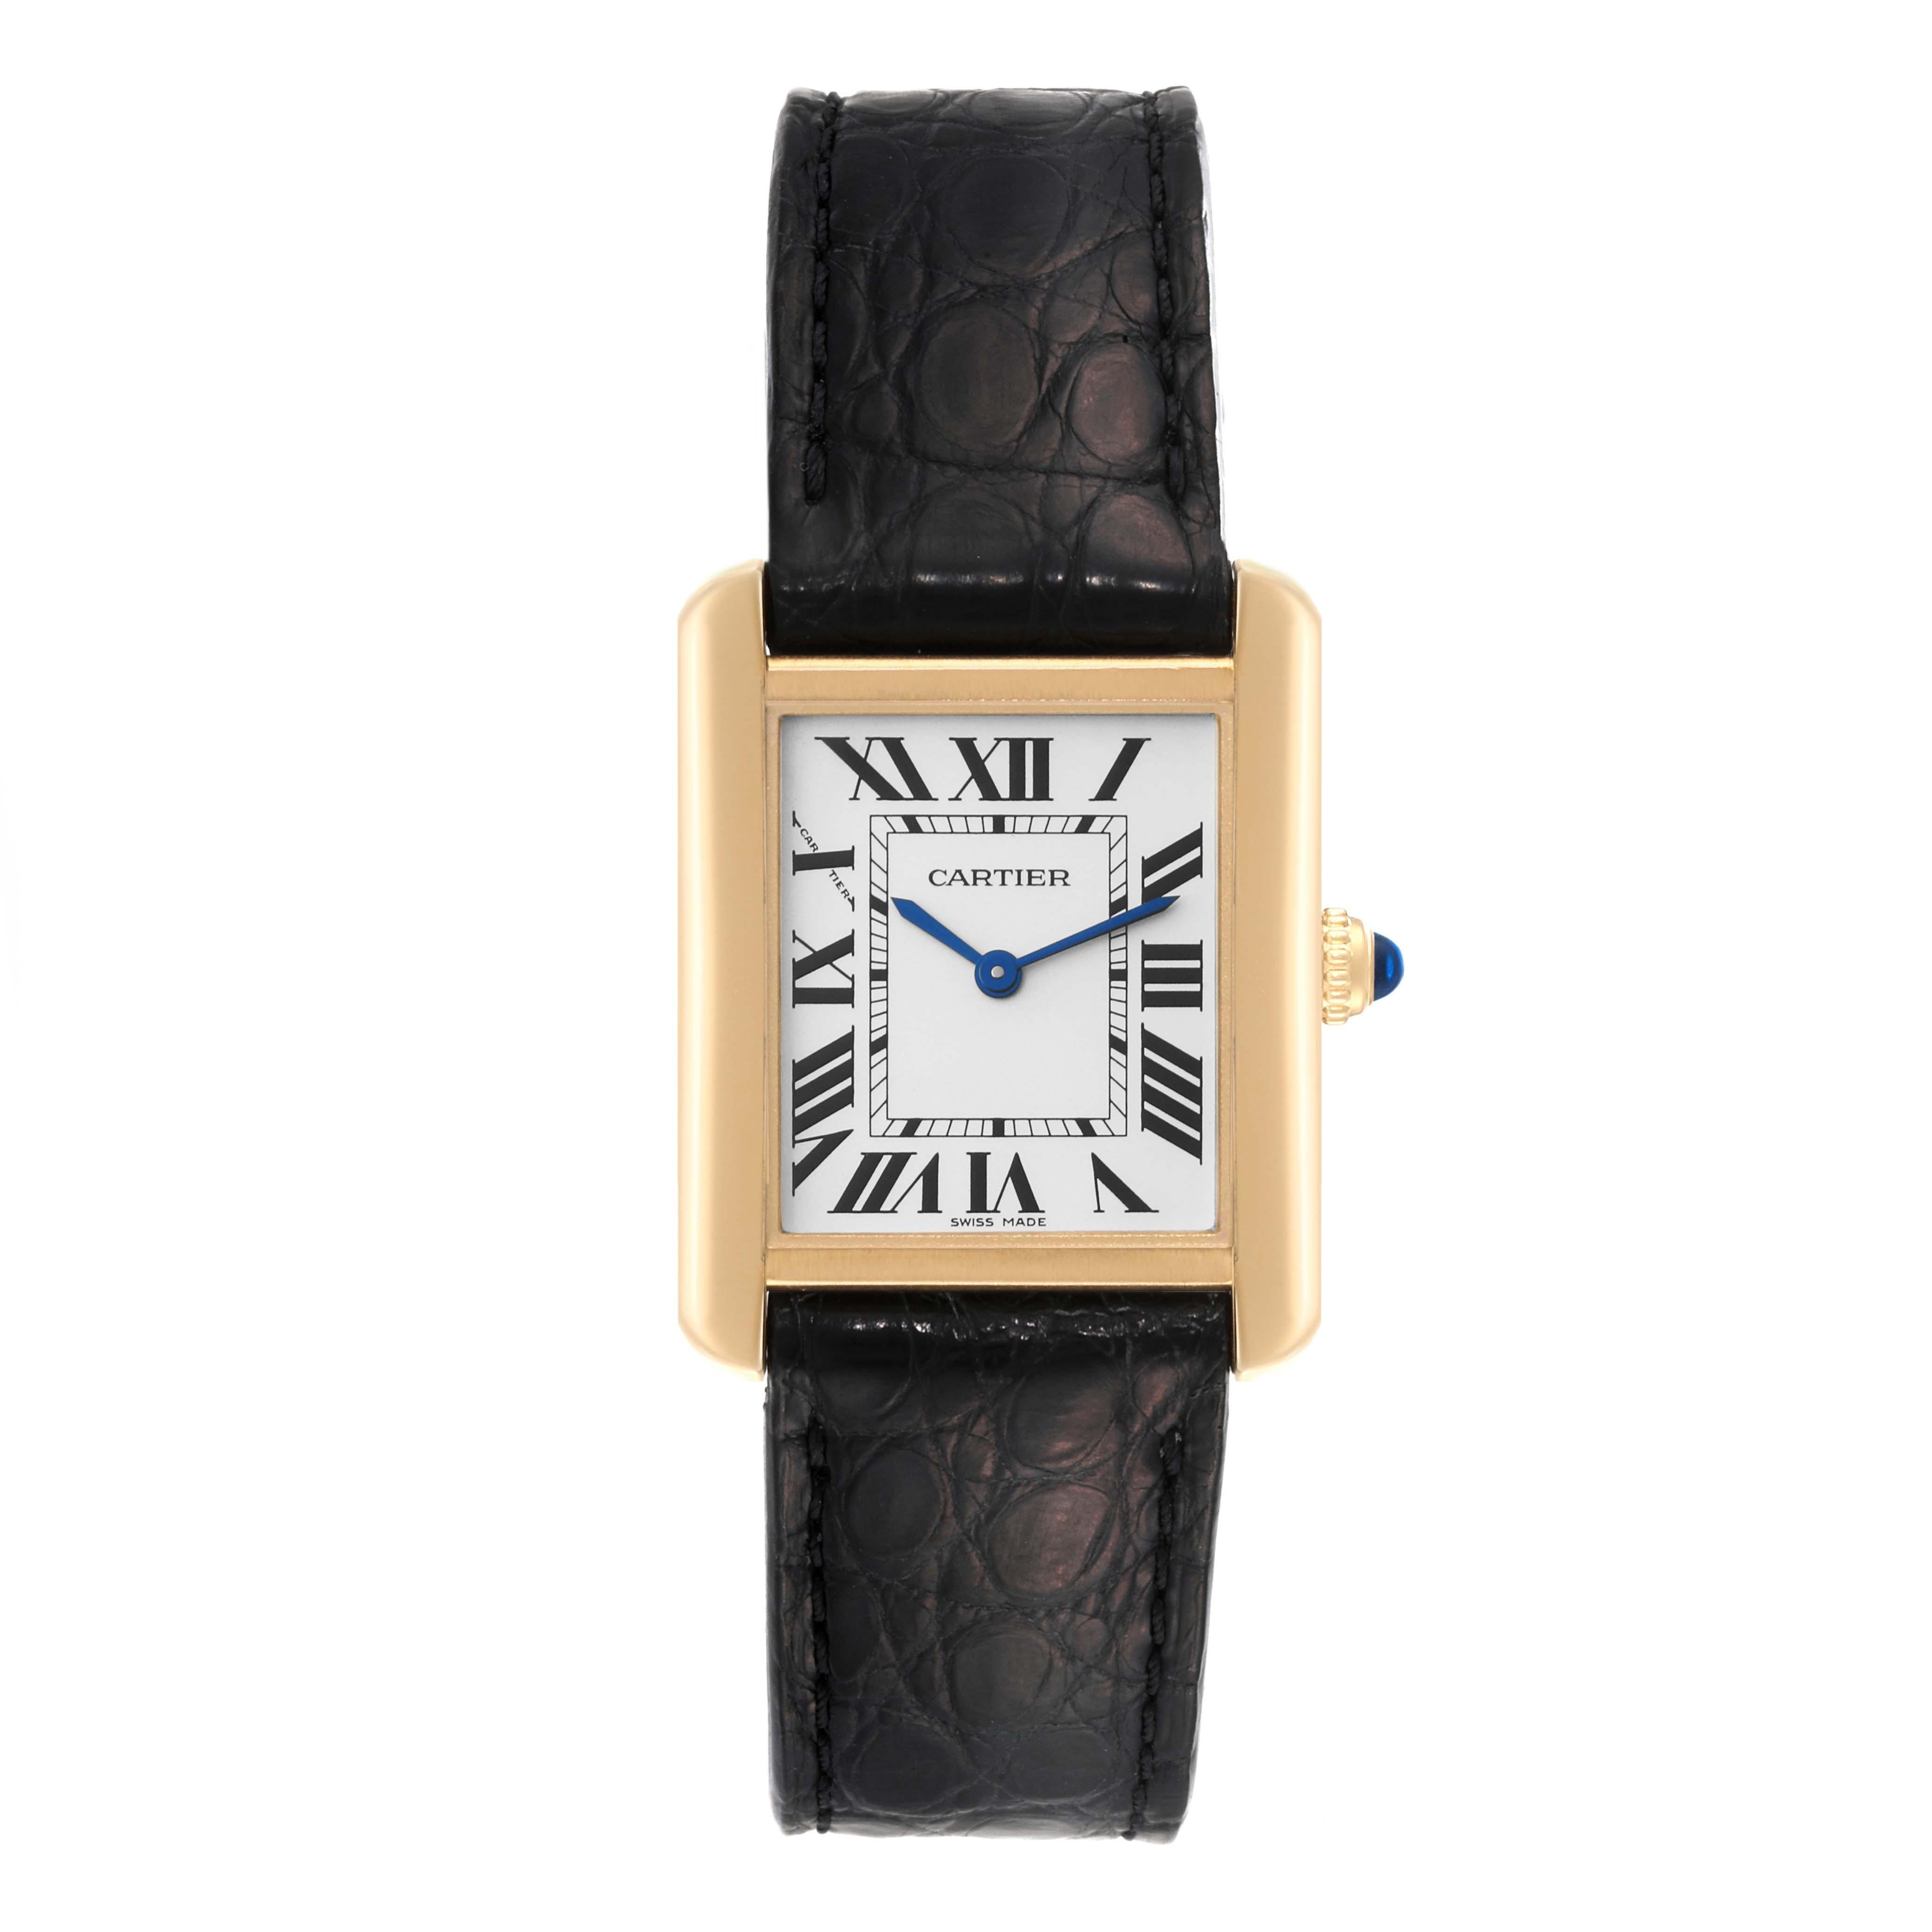 Cartier Tank Solo Yellow Gold Steel Silver Dial Ladies Watch W5200002 Papers. Quartz movement. 18k yellow gold case 30.0 x 24.4 mm. Stainless steel case back. Circular grained crown set with the blue spinel cabochon. . Scratch resistant sapphire